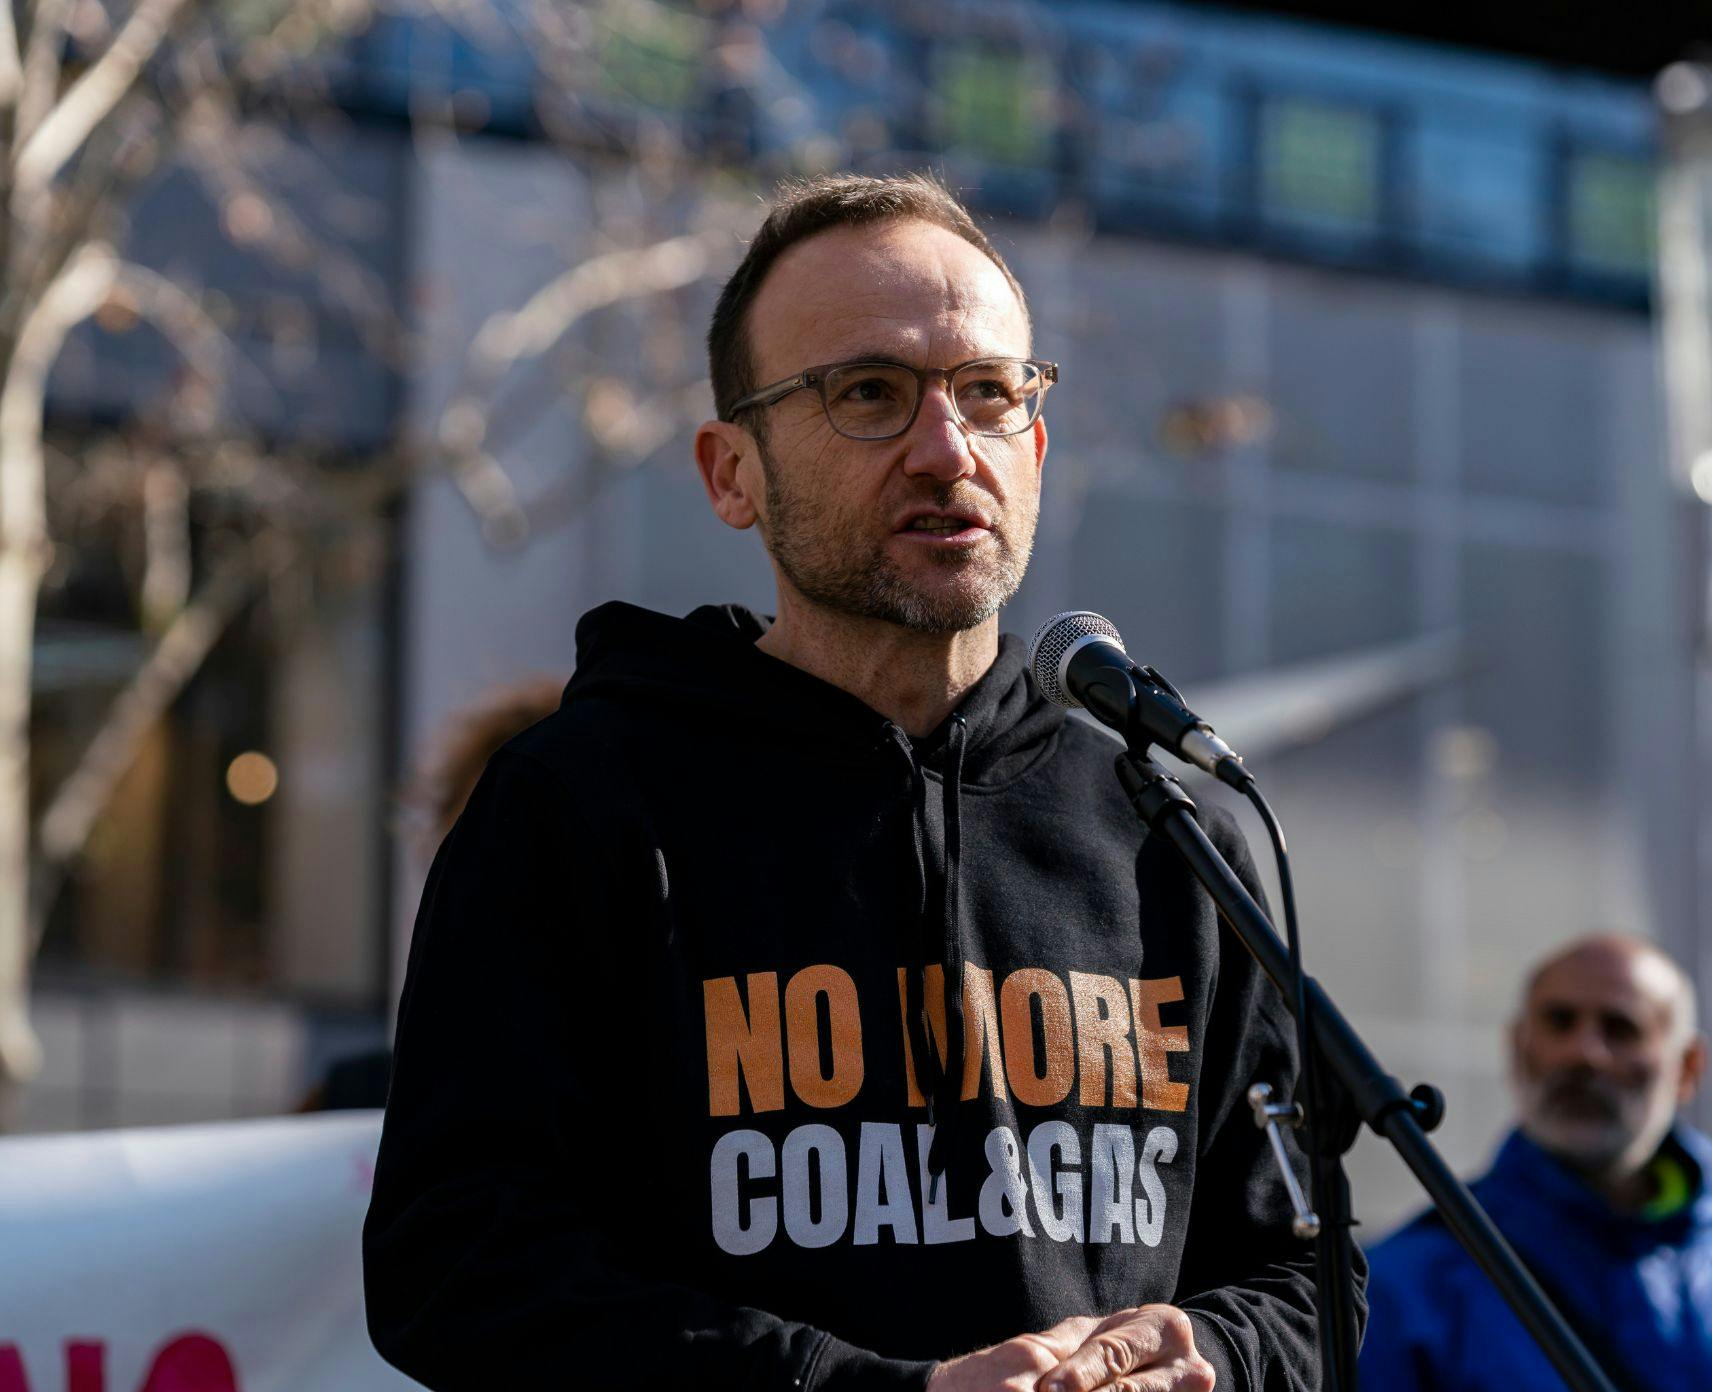 Adam Bandt in a 'No More Coal and Gas' hoddie speaking at a protest